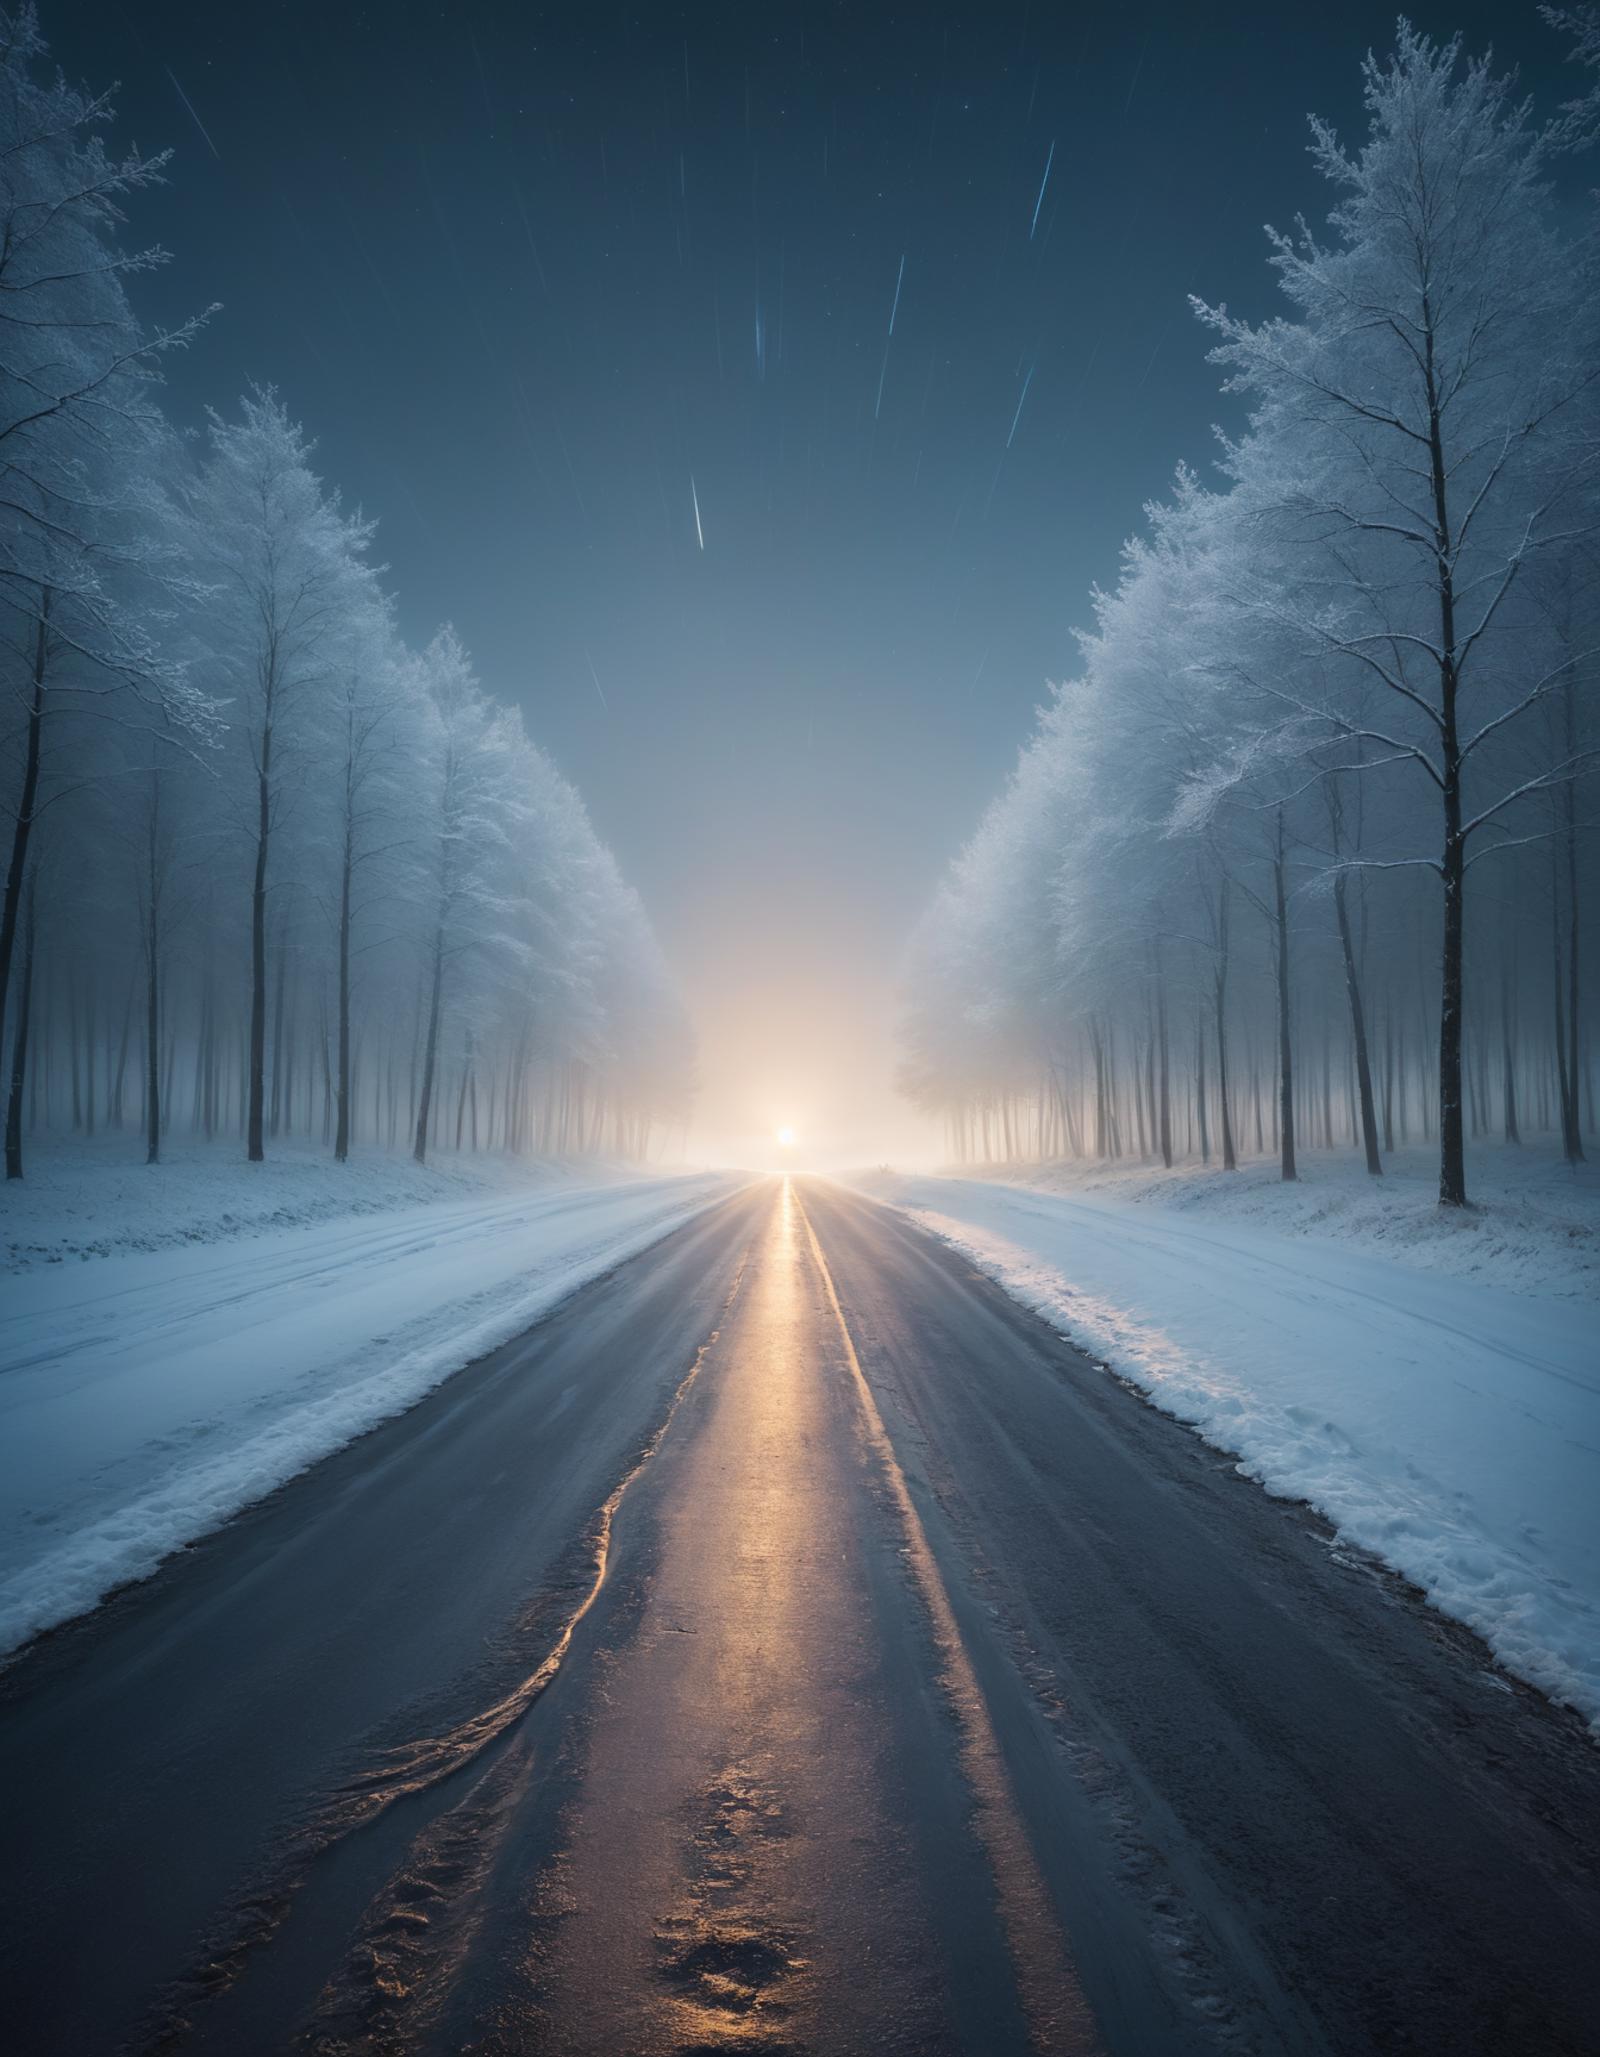 A snowy road with trees on either side and a bright light ahead.